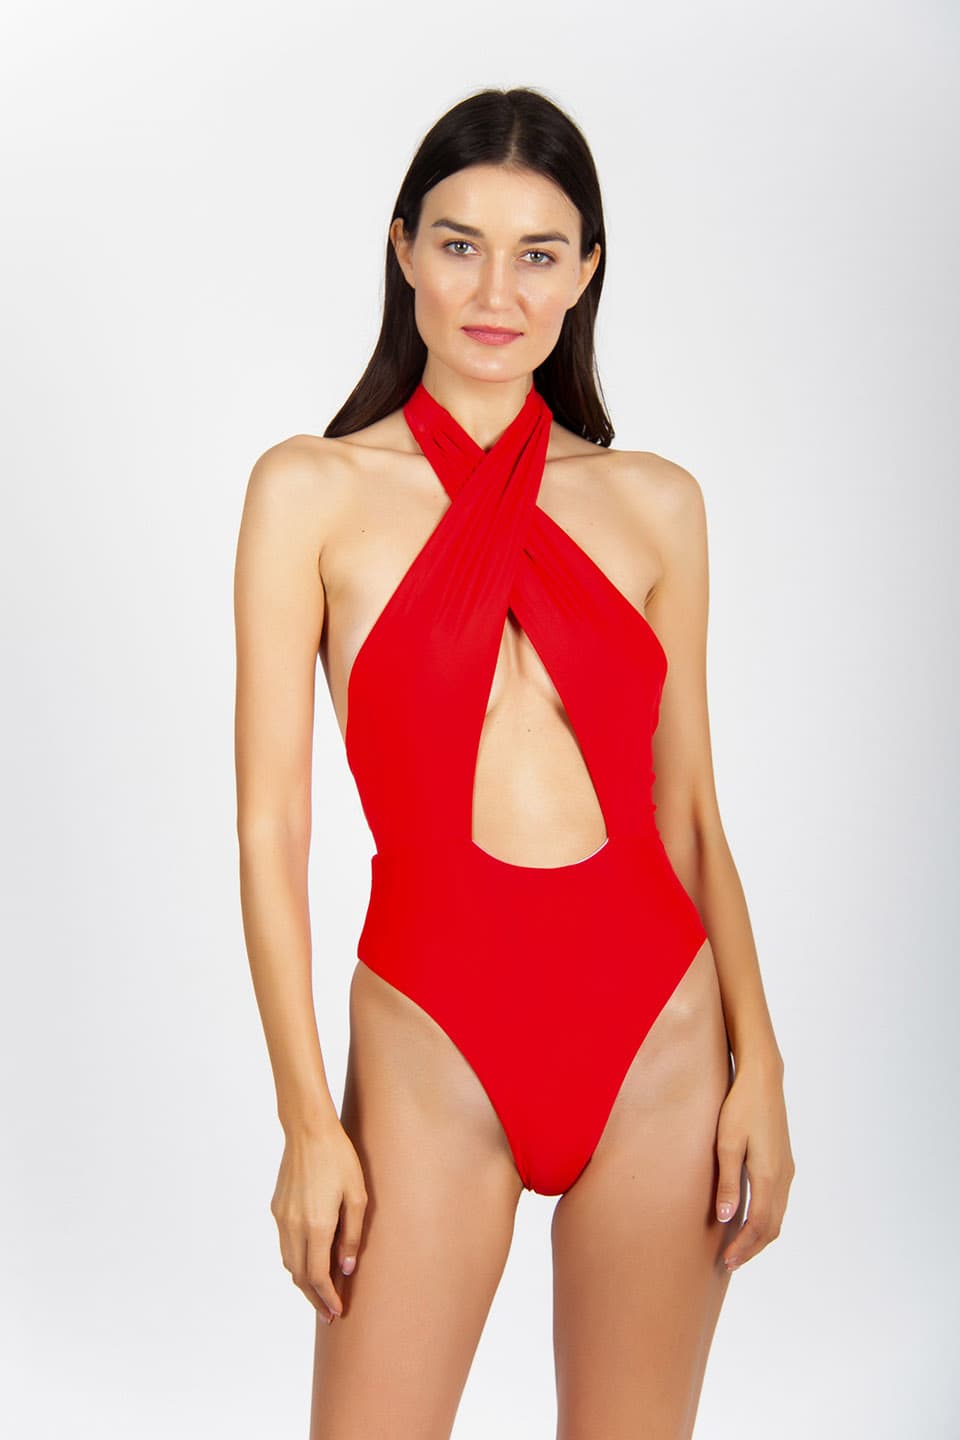 Model wearing red one-piece swimsuit, tied around the neck. Front view